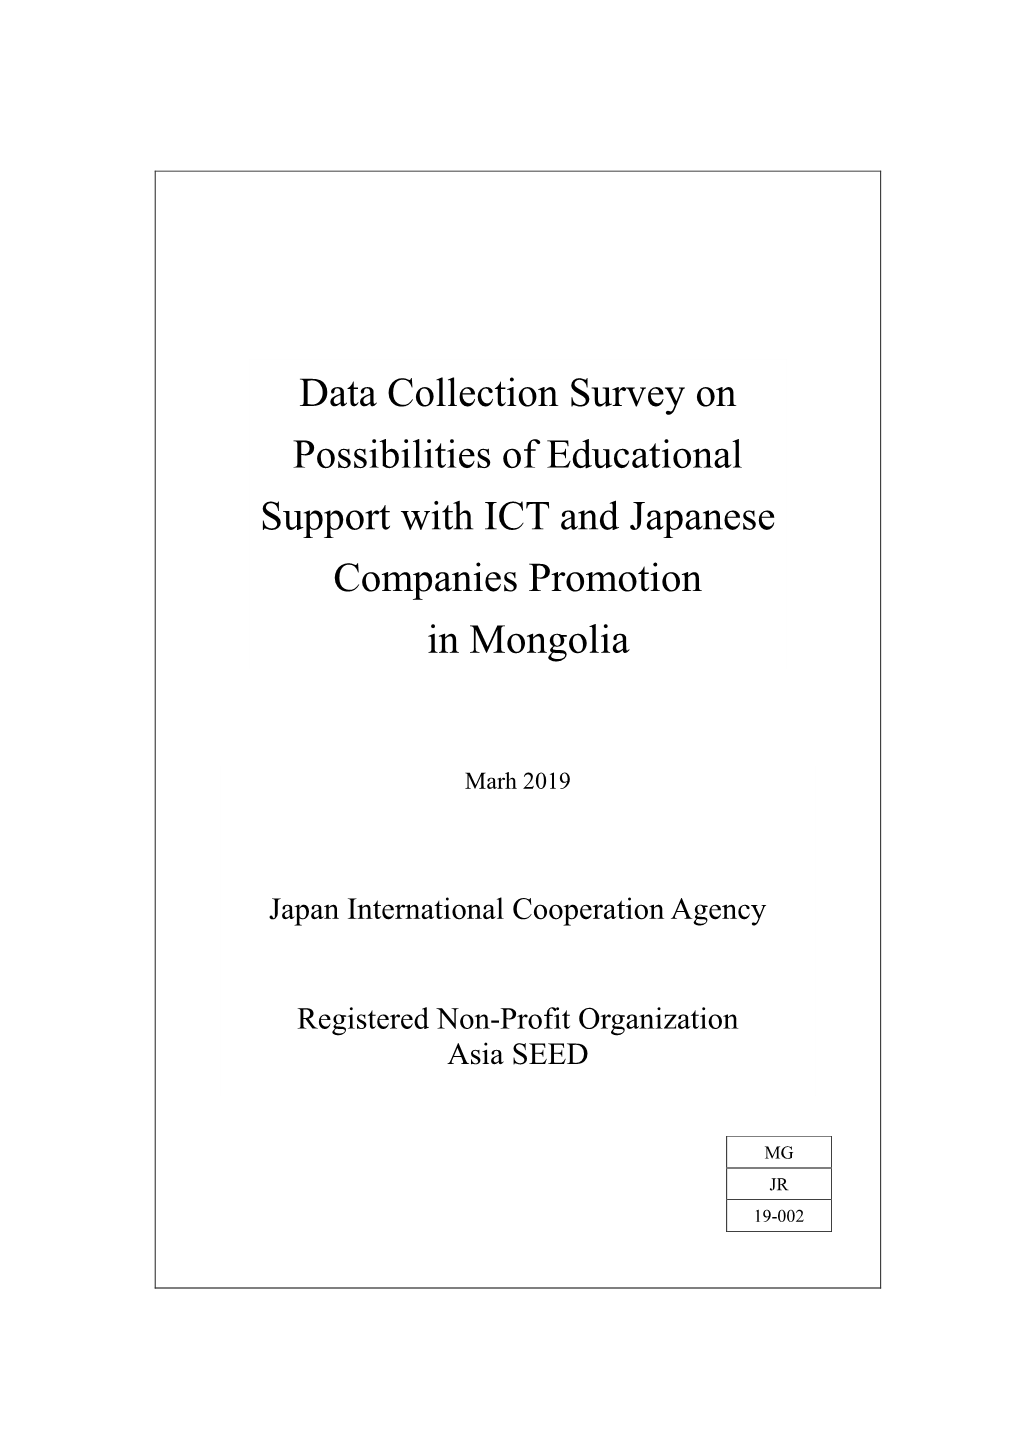 Data Collection Survey on Possibilities of Educational Support with ICT and Japanese Companies Promotion